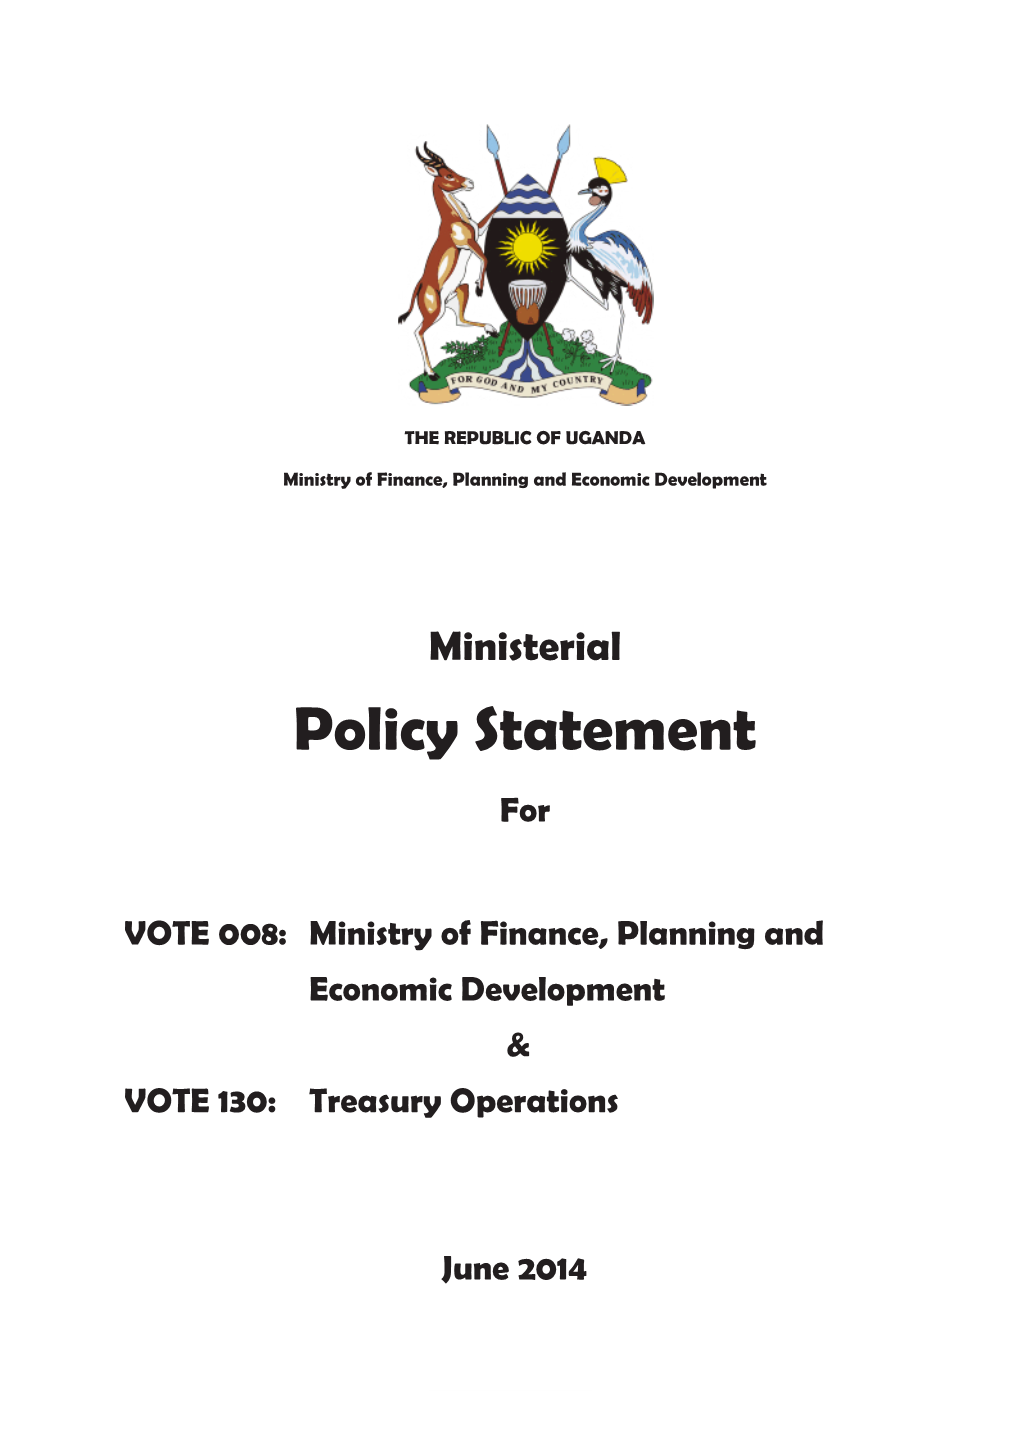 Vote 008 Ministerial Policy Statement.Pdf